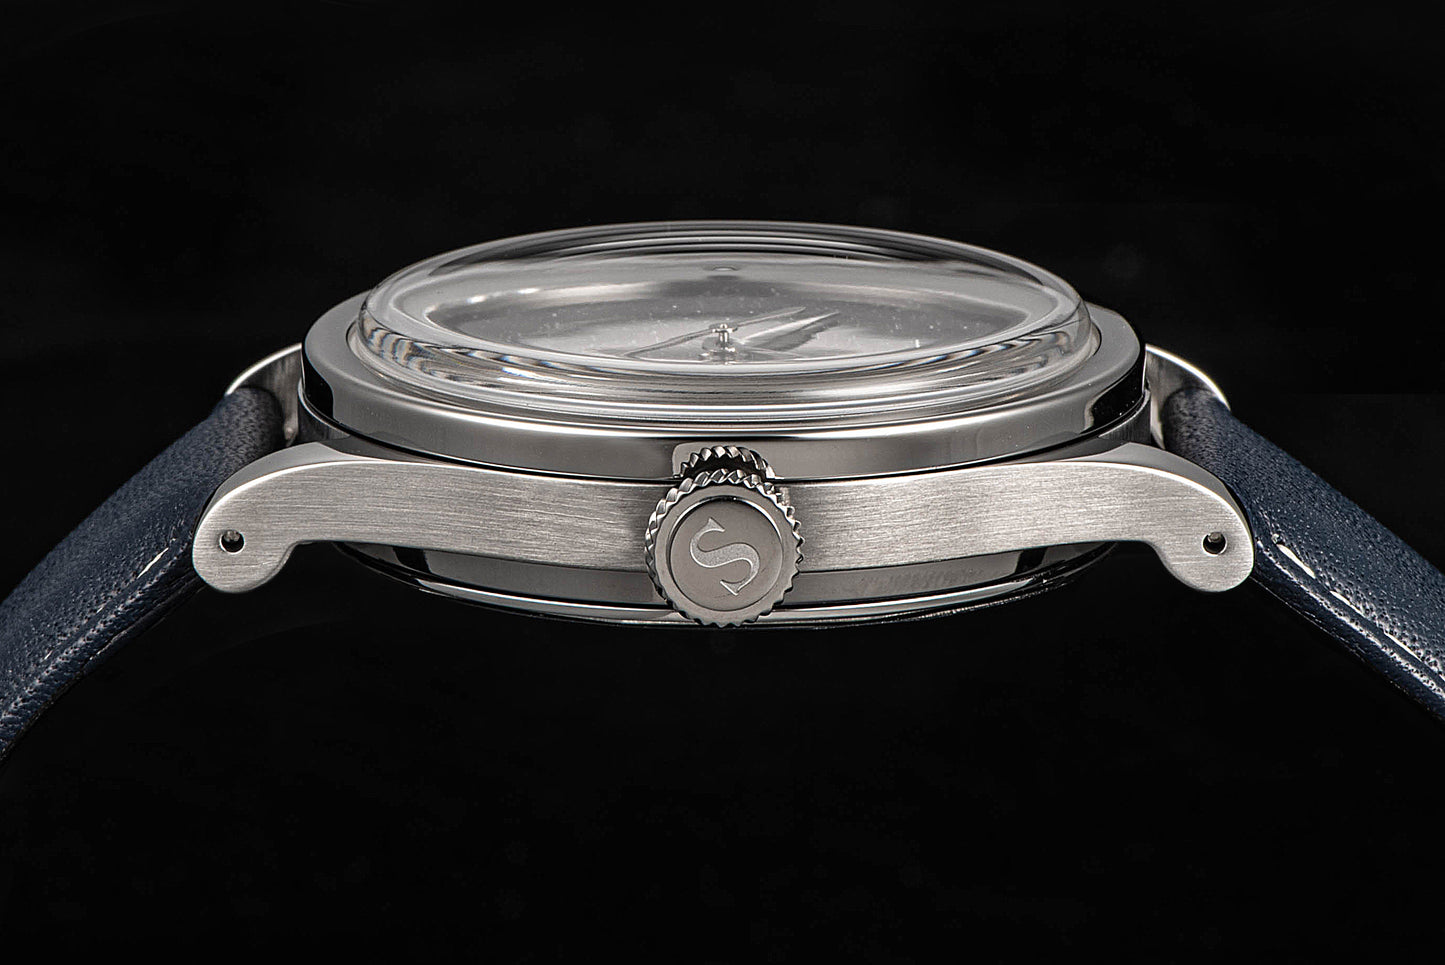 Heritage 411-3B Seagull 2130 Movement Stainless Steel Case Stars Dial SU4113BSTRS